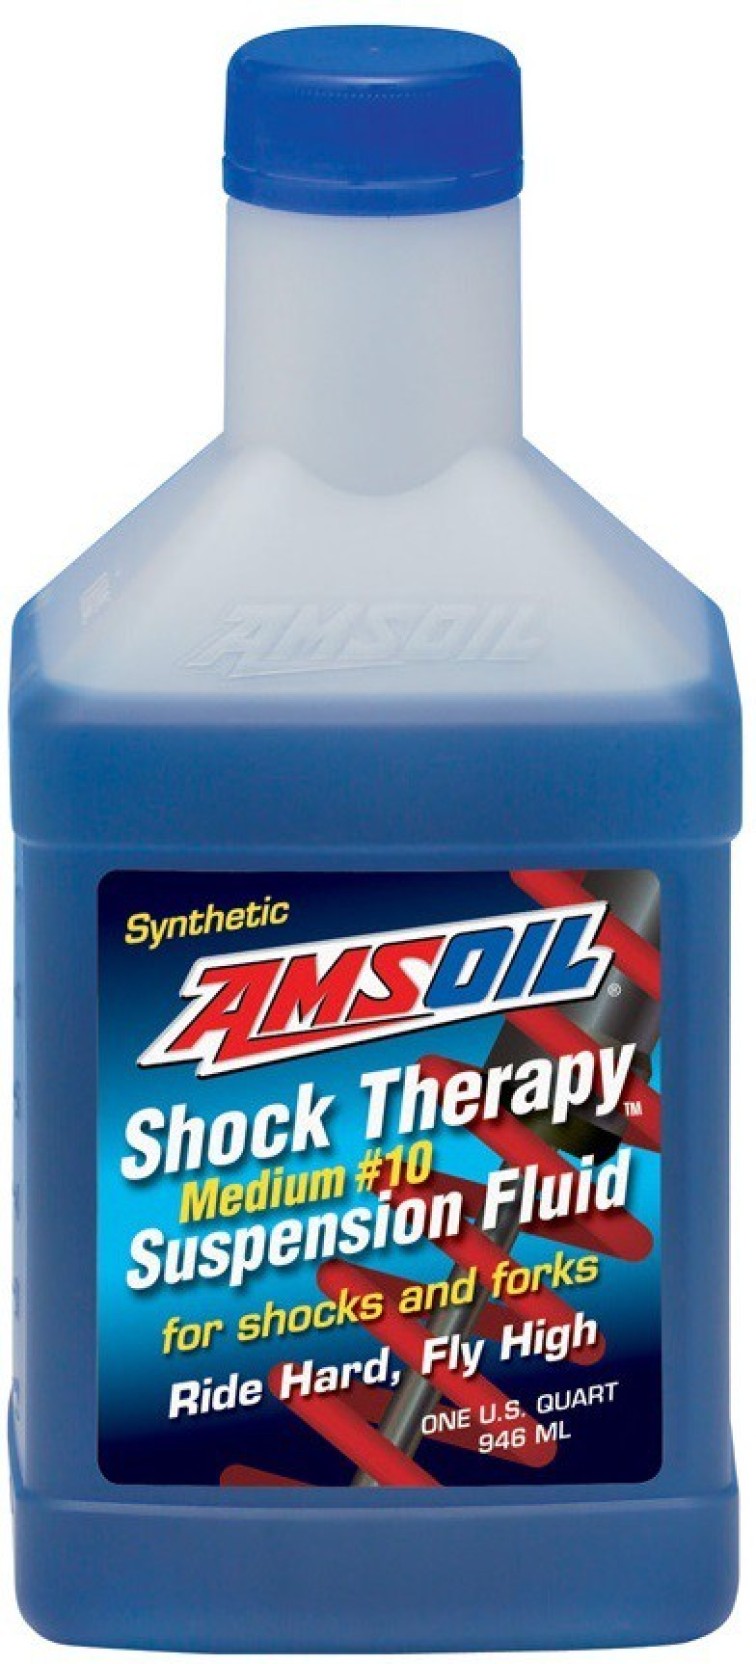 Amsoil Shock Therapy #10 Medium